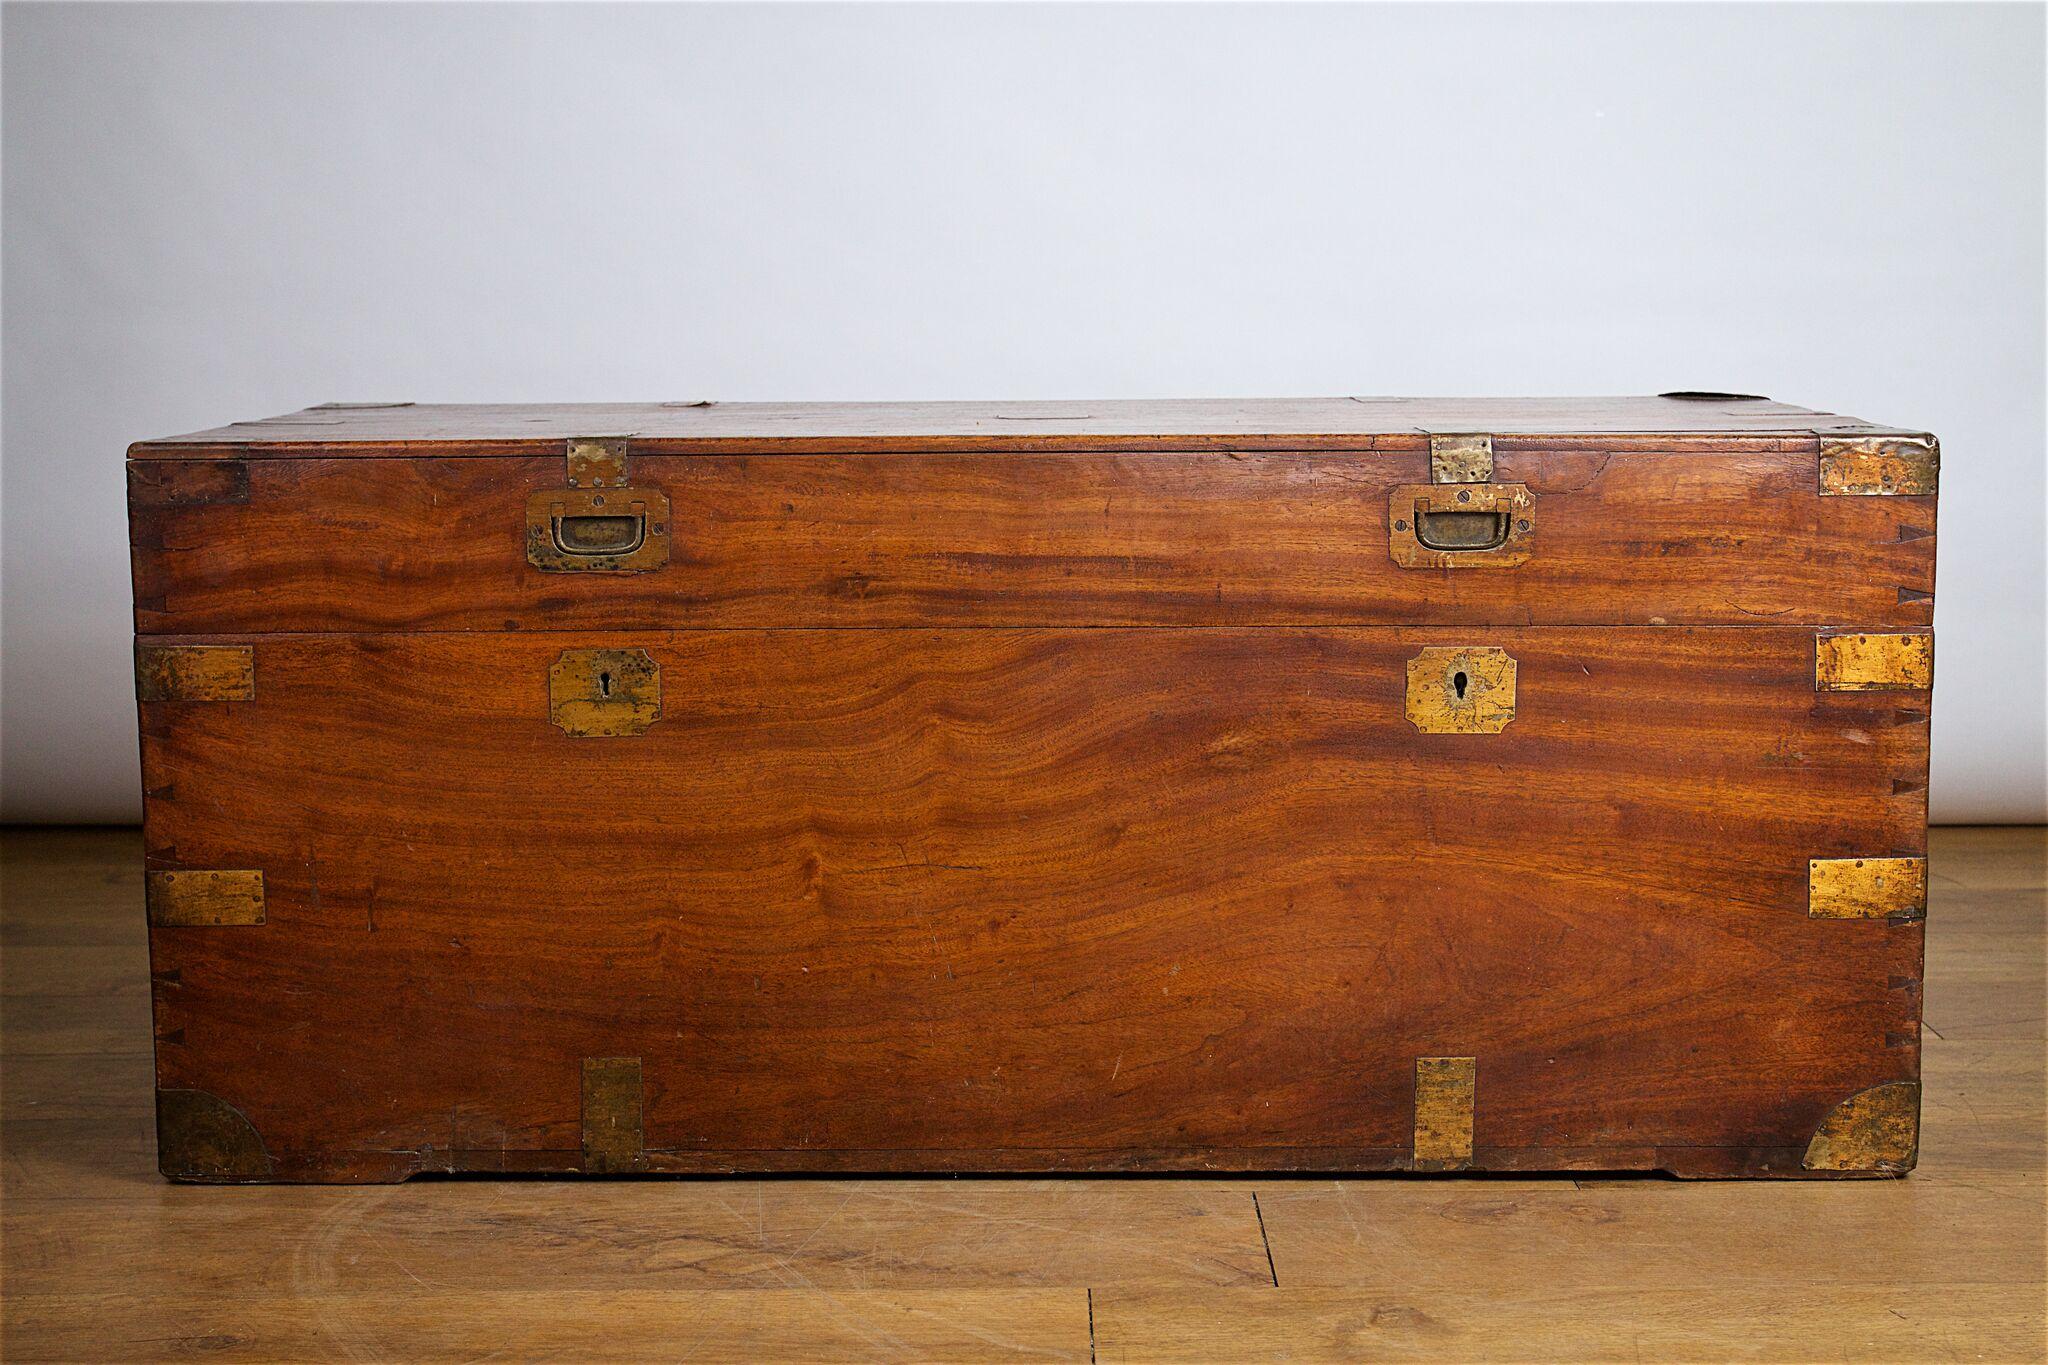 19th century brass bound camphor wood travelling chest complete with camphor scent!